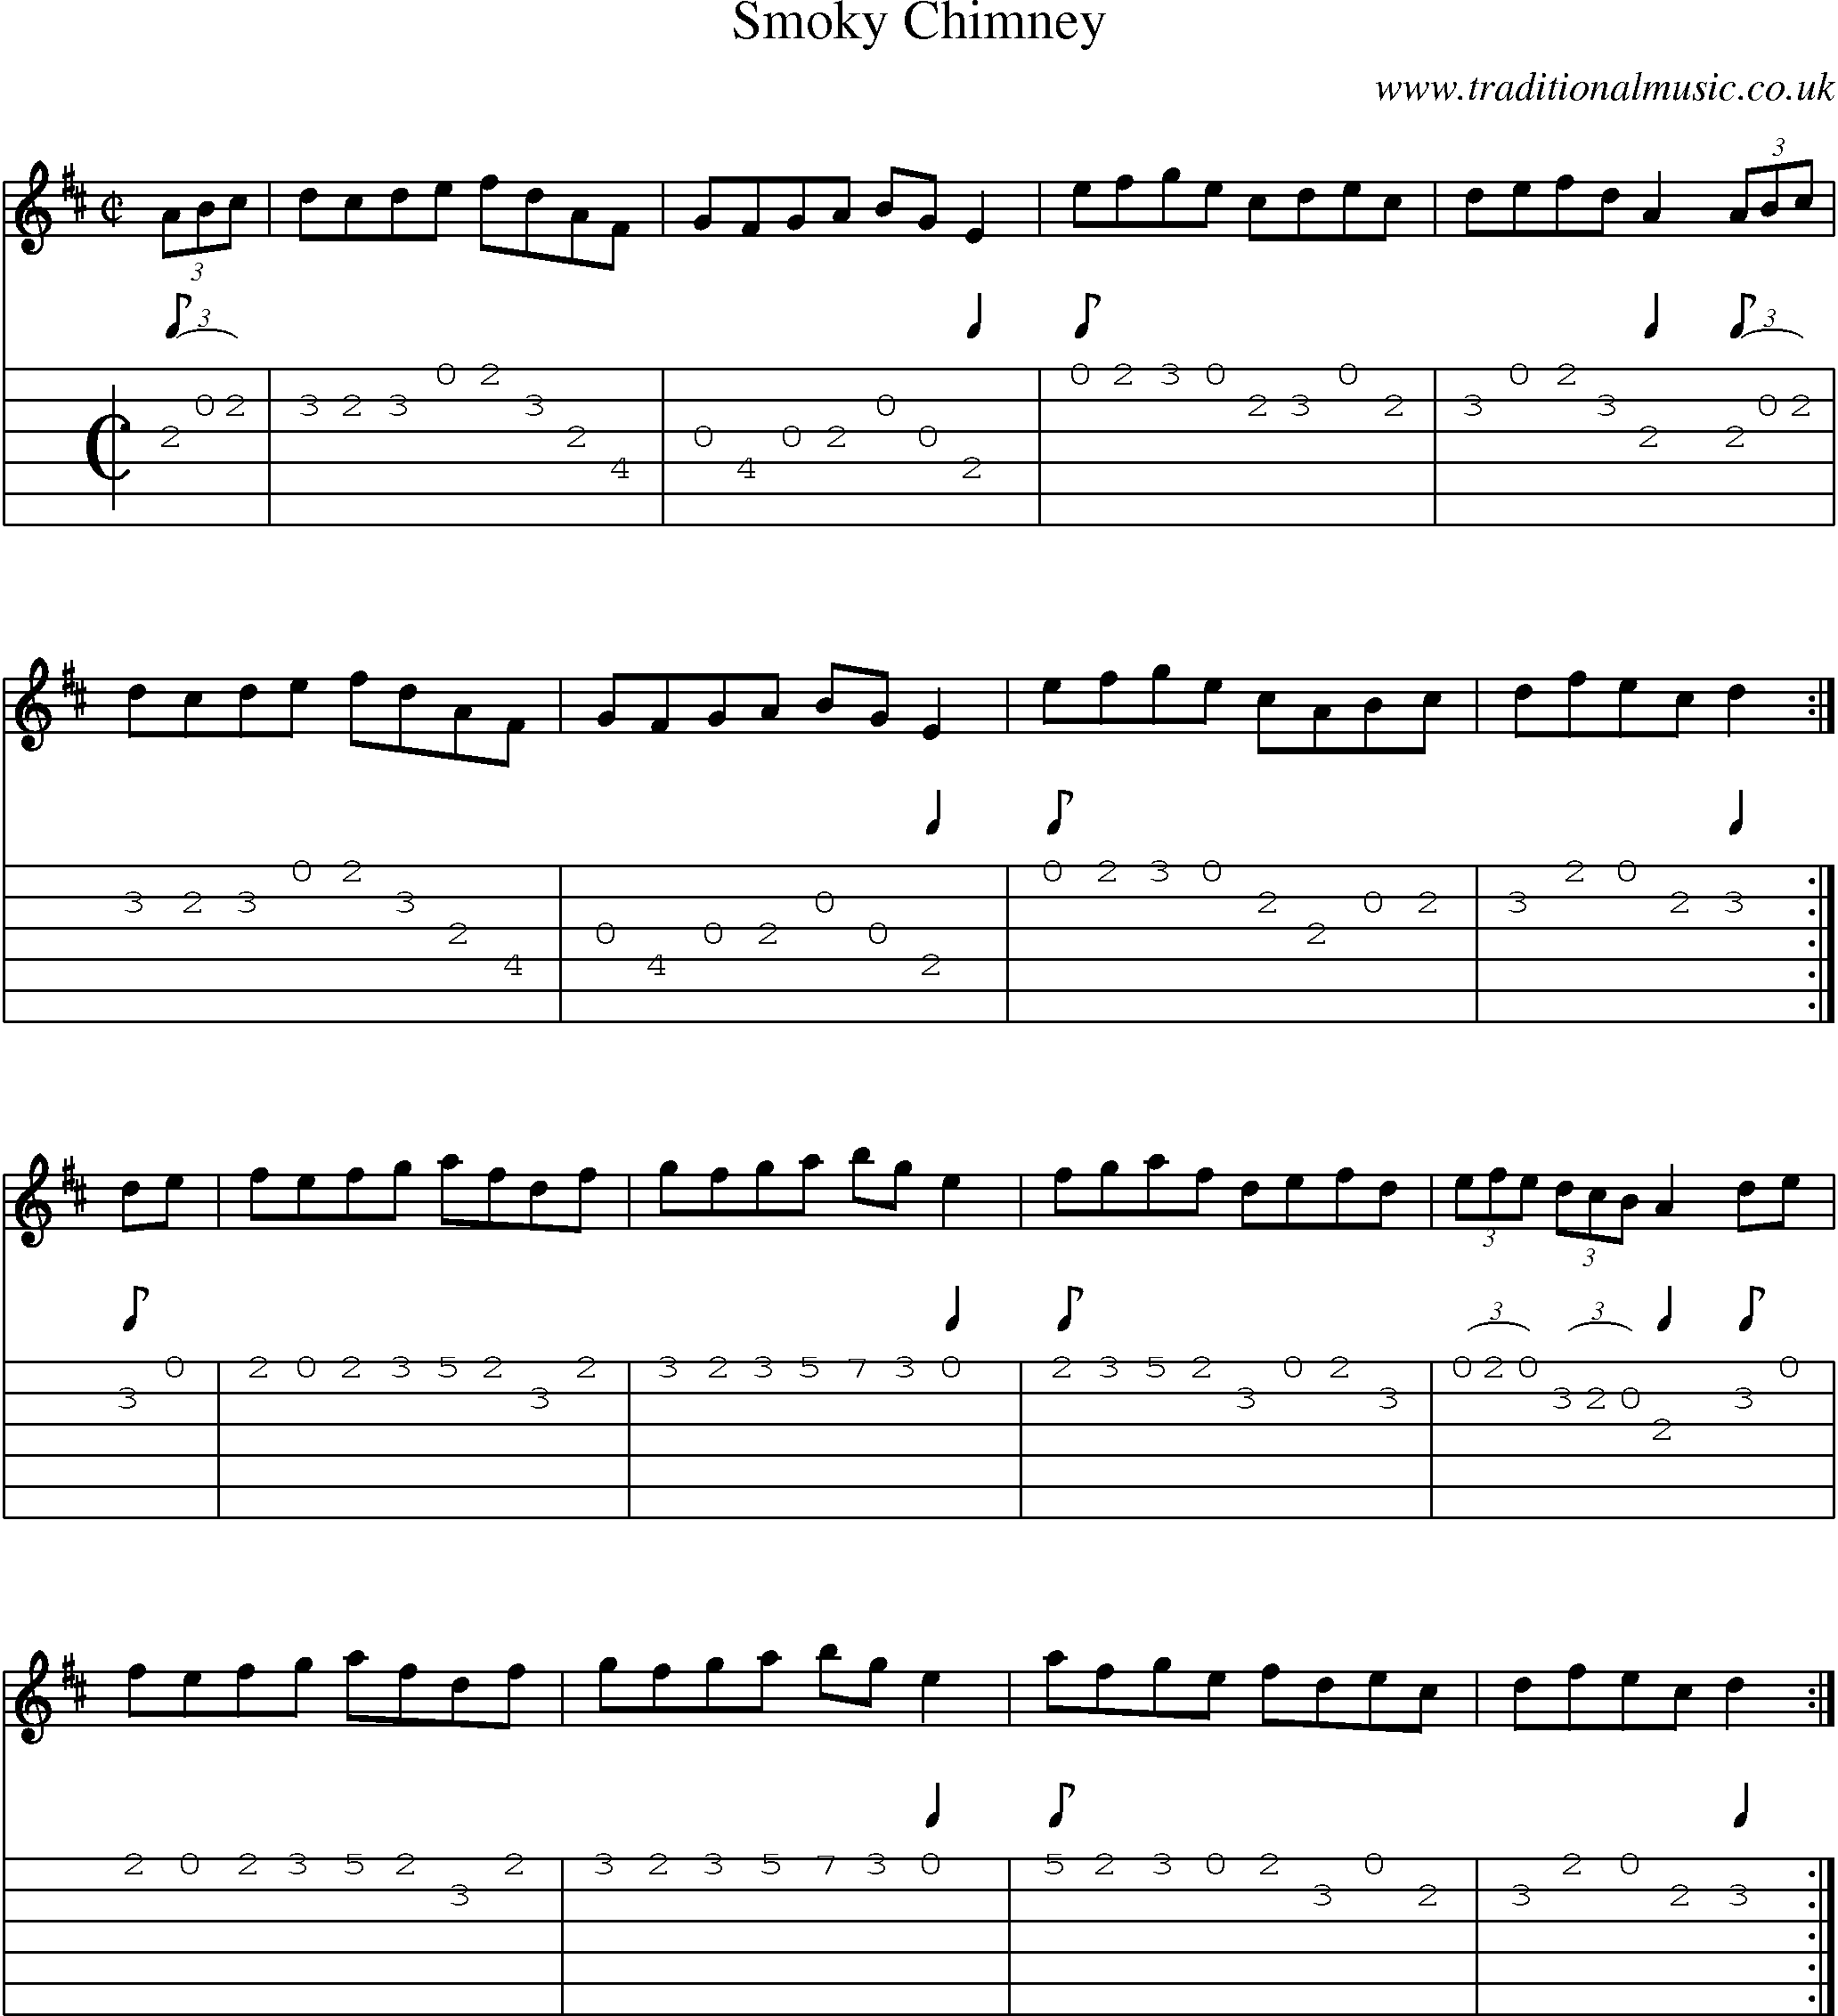 Music Score and Guitar Tabs for Smoky Chimney